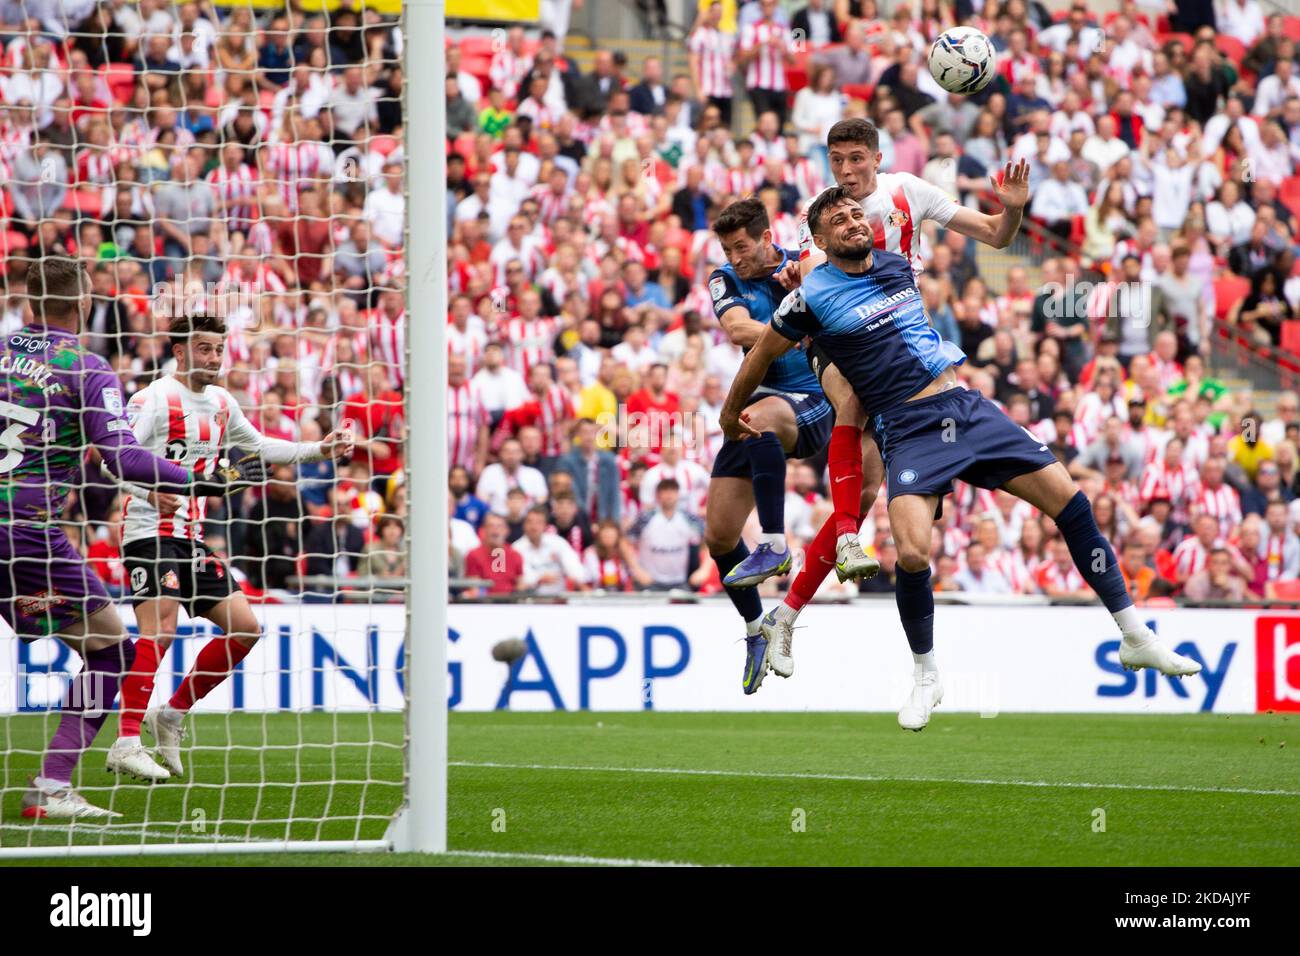 Ross Stewart of Sunderland and Ryan Tafazolli of Wycombe Wanderers Wanderers battle for the ball during the Sky Bet League 1 match between Sunderland and Wycombe Wanderers at Wembley Stadium, London on Saturday 21st May 2022. (Photo by Federico Maranesi/MI News/NurPhoto) Stock Photo